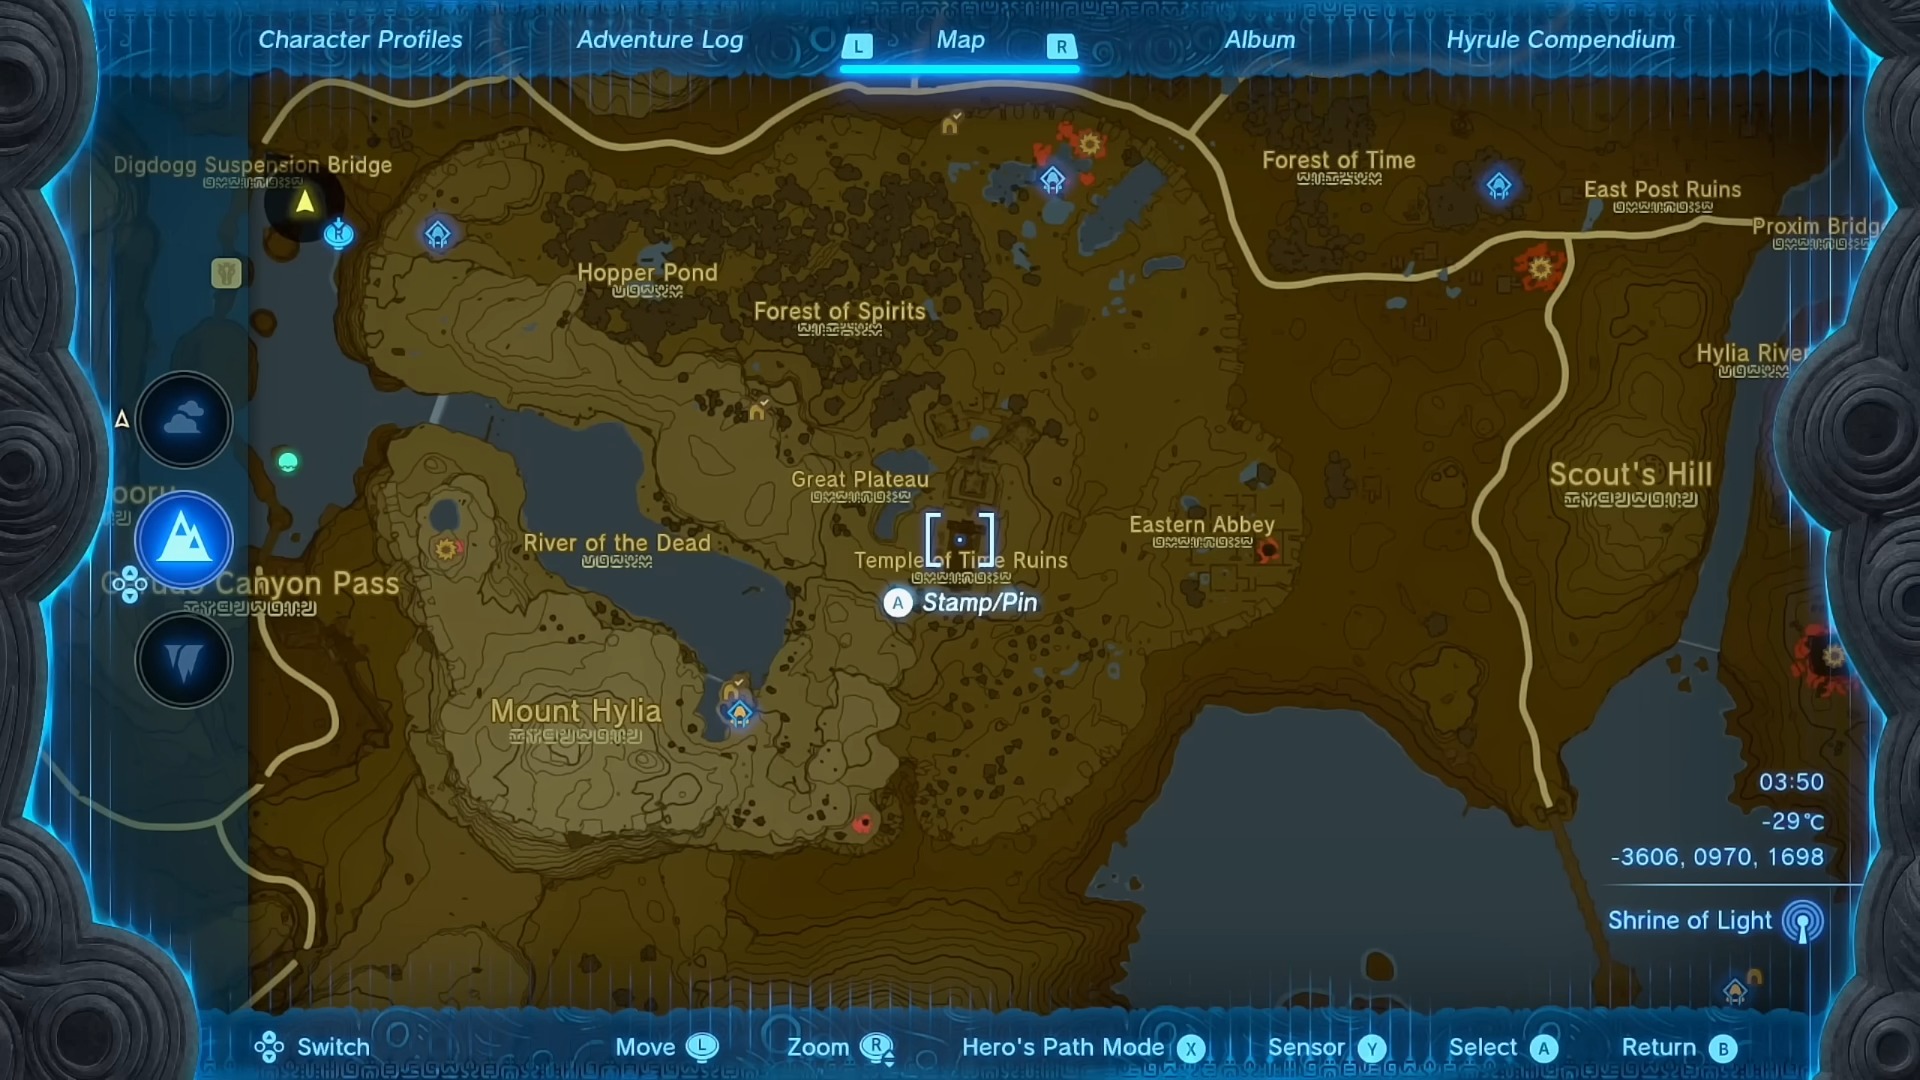 Temple of Time Ruins Map